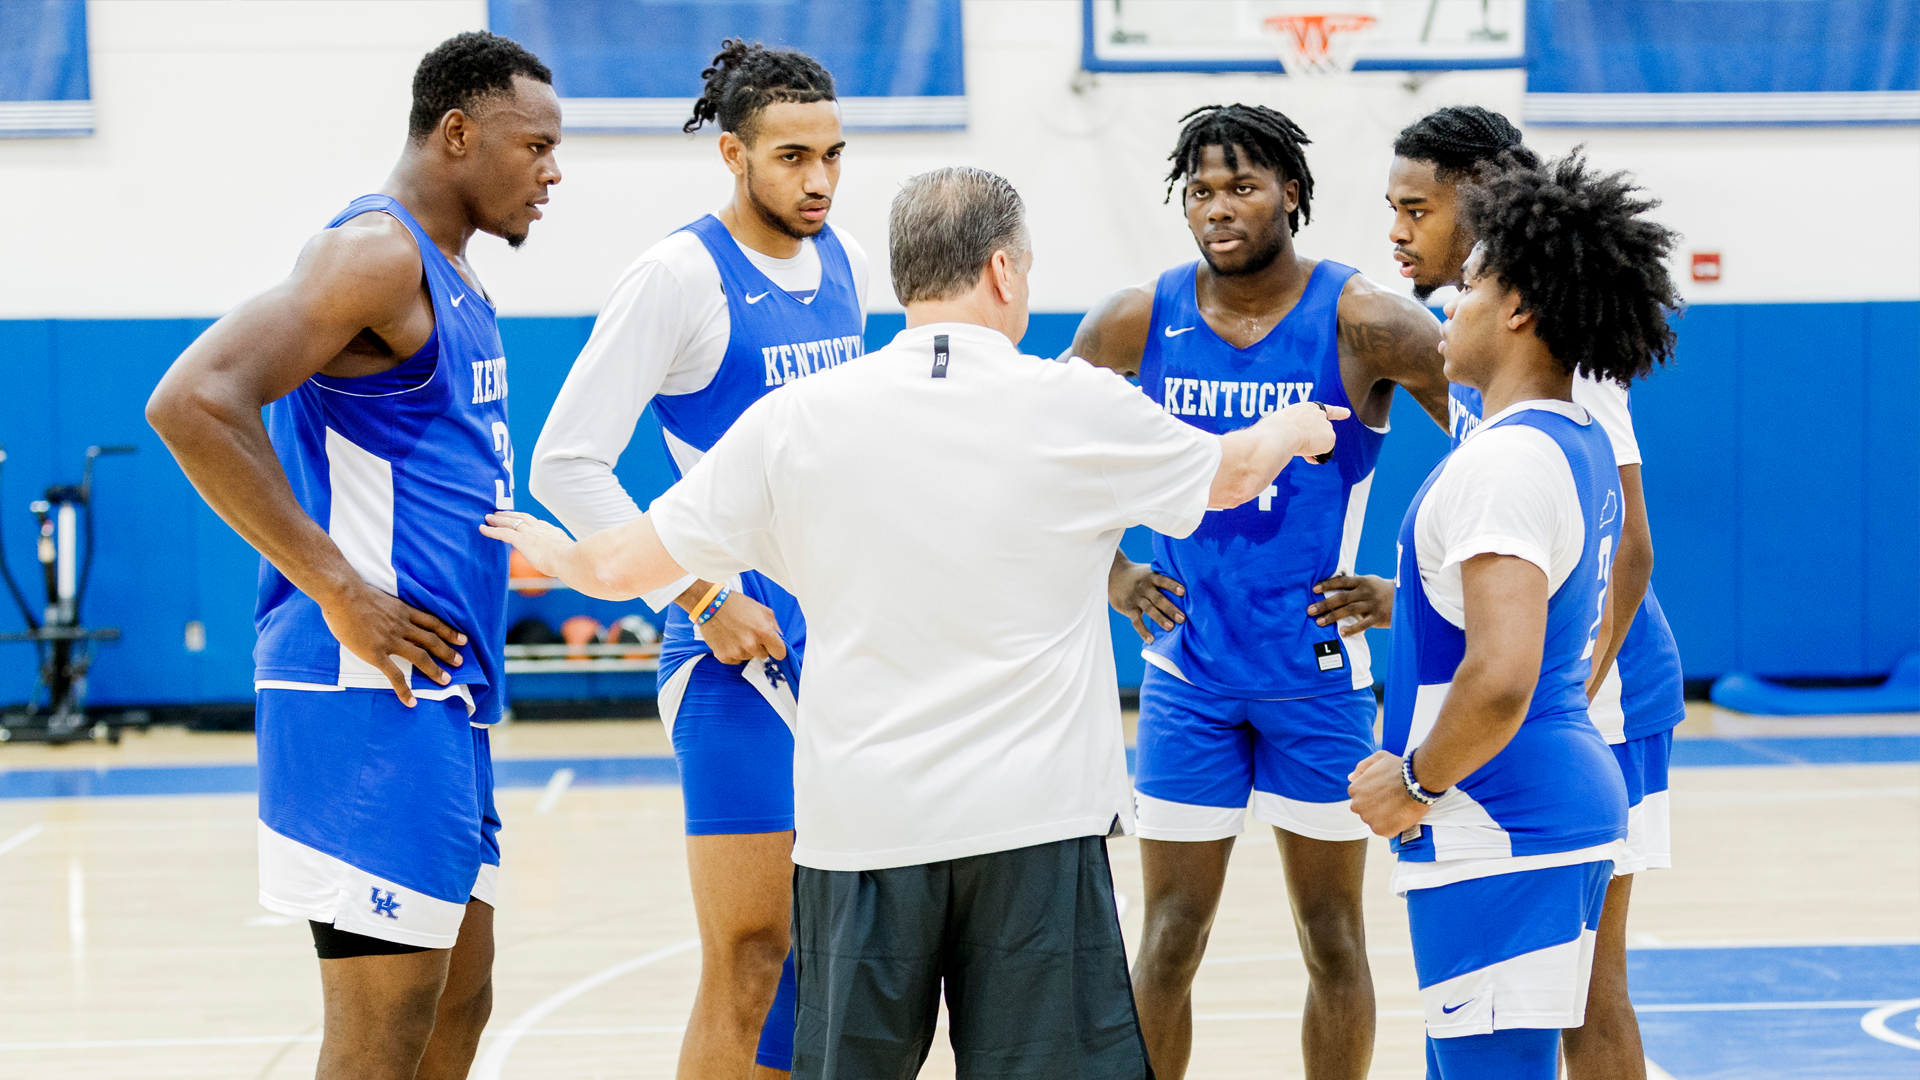 MBB to Host Open Practice for Kentucky Flood Relief